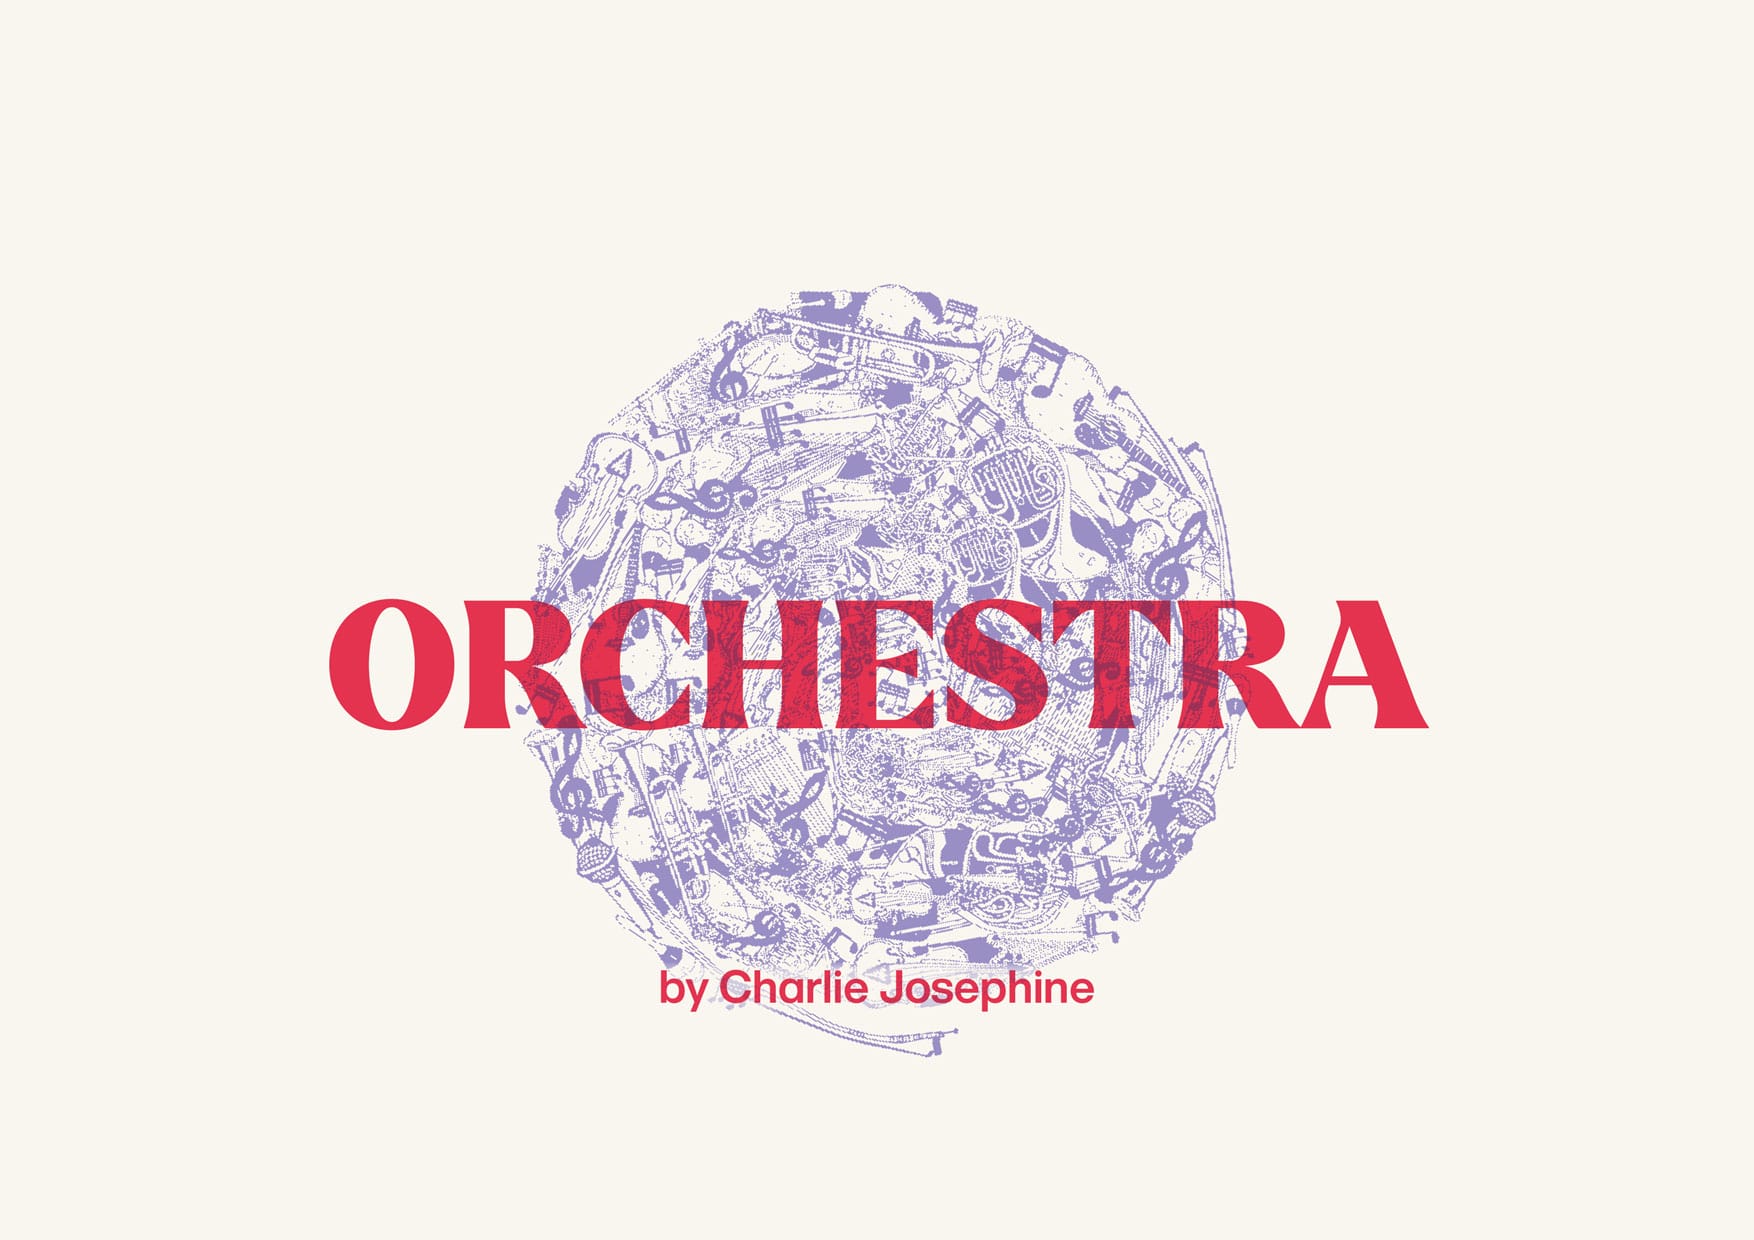 On a cream coloured background, illustrations of musical instruments form a circle. Red text on the image reads Orchestra by Charlie Josephine.